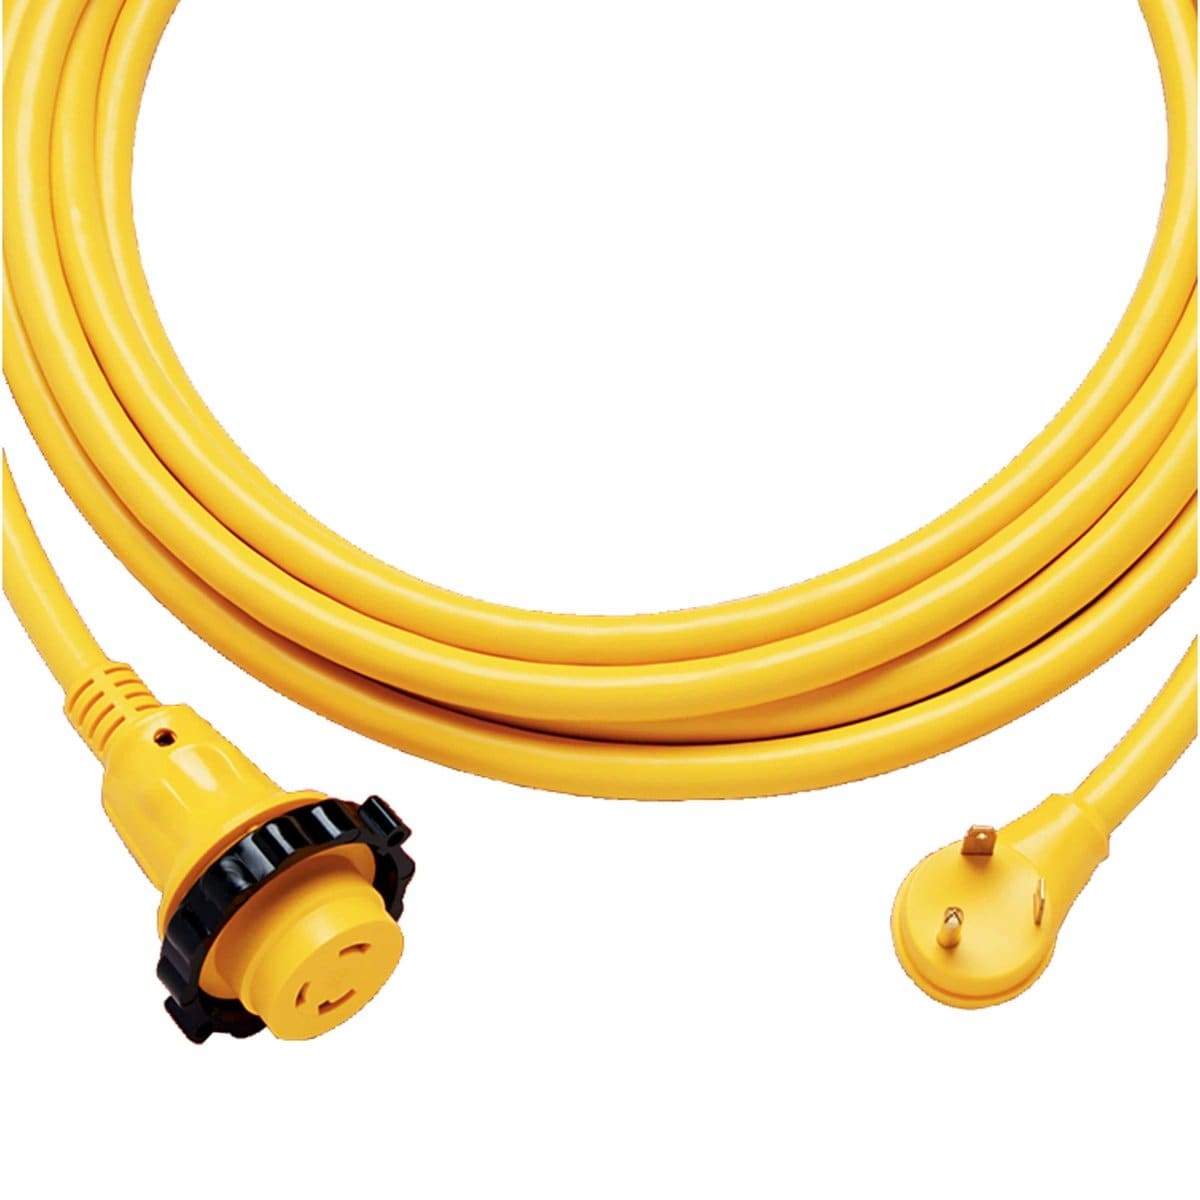 ParkPower Qualifies for Free Shipping ParkPower Locking Powercord Plus Cordset with RV Plug 30' 30a #30SPPRV